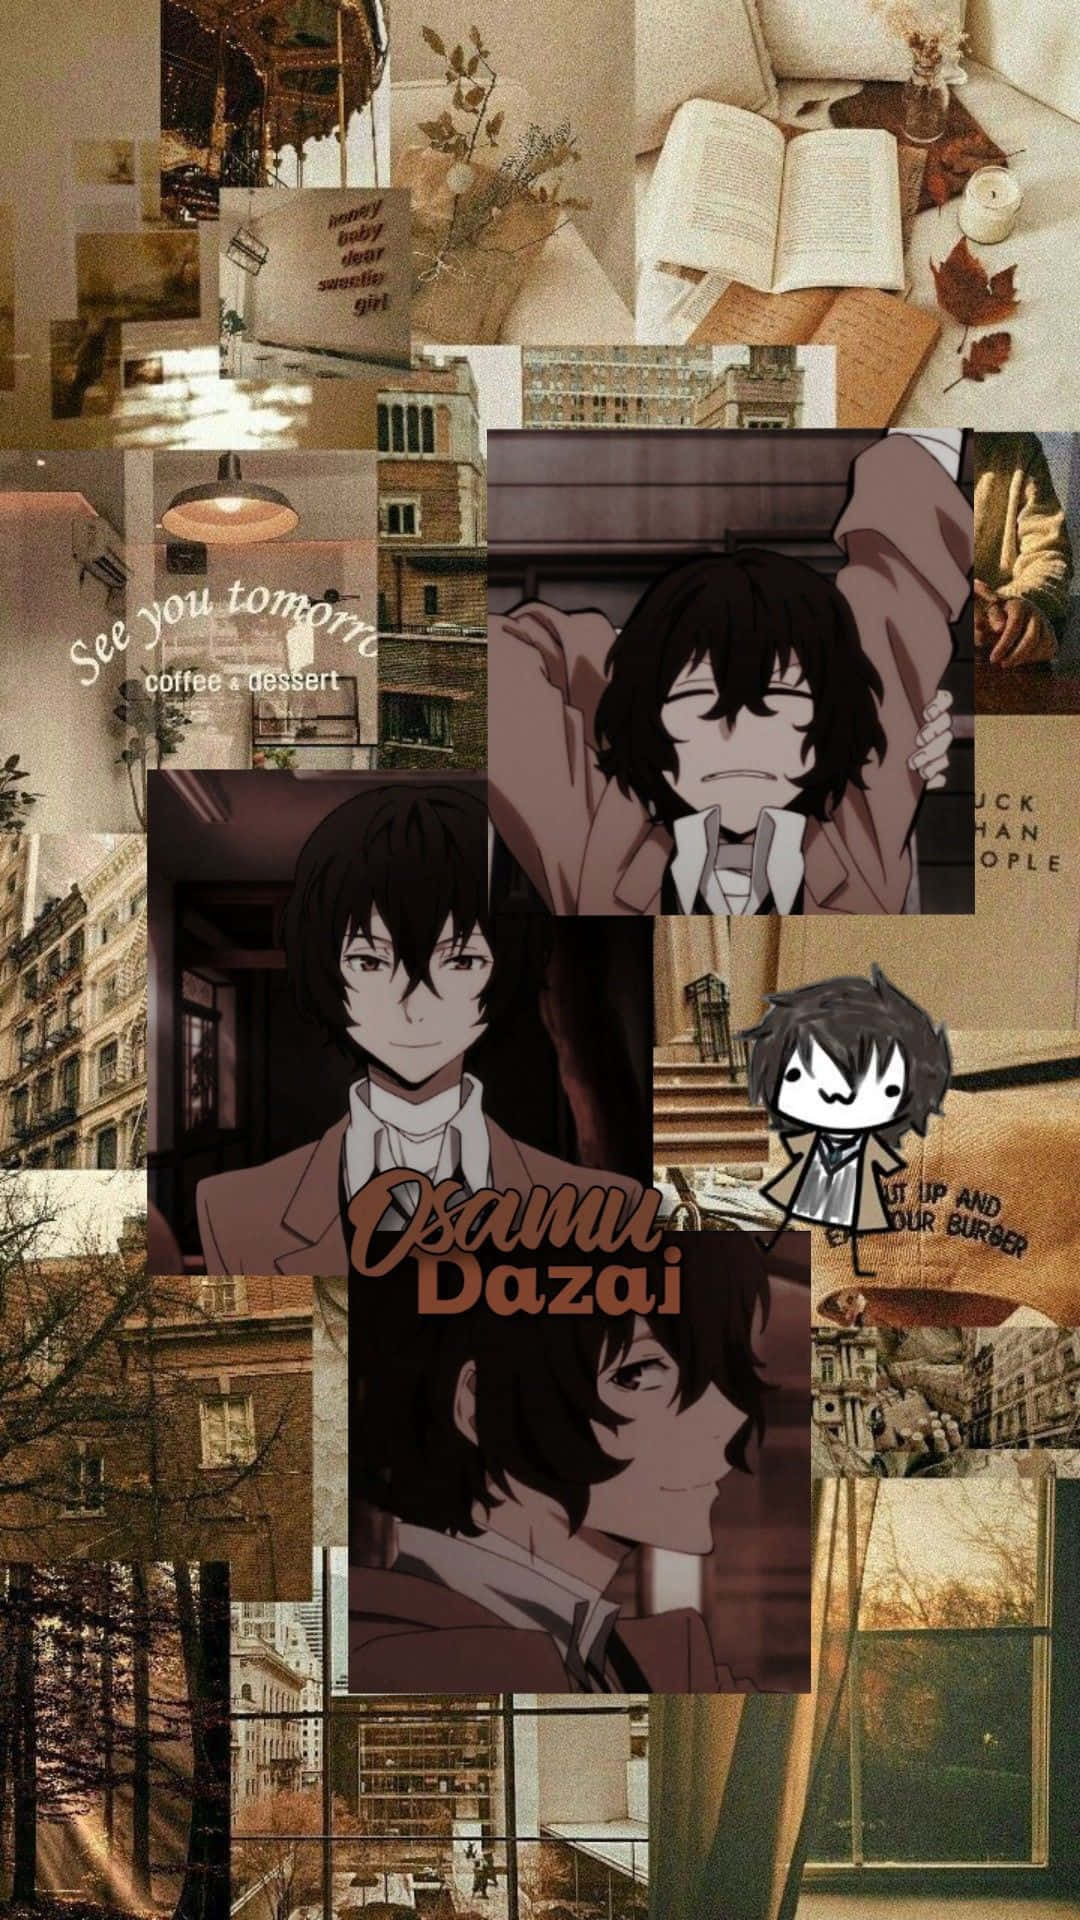 Get Lost in the Adventure of Bungo Stray Dogs